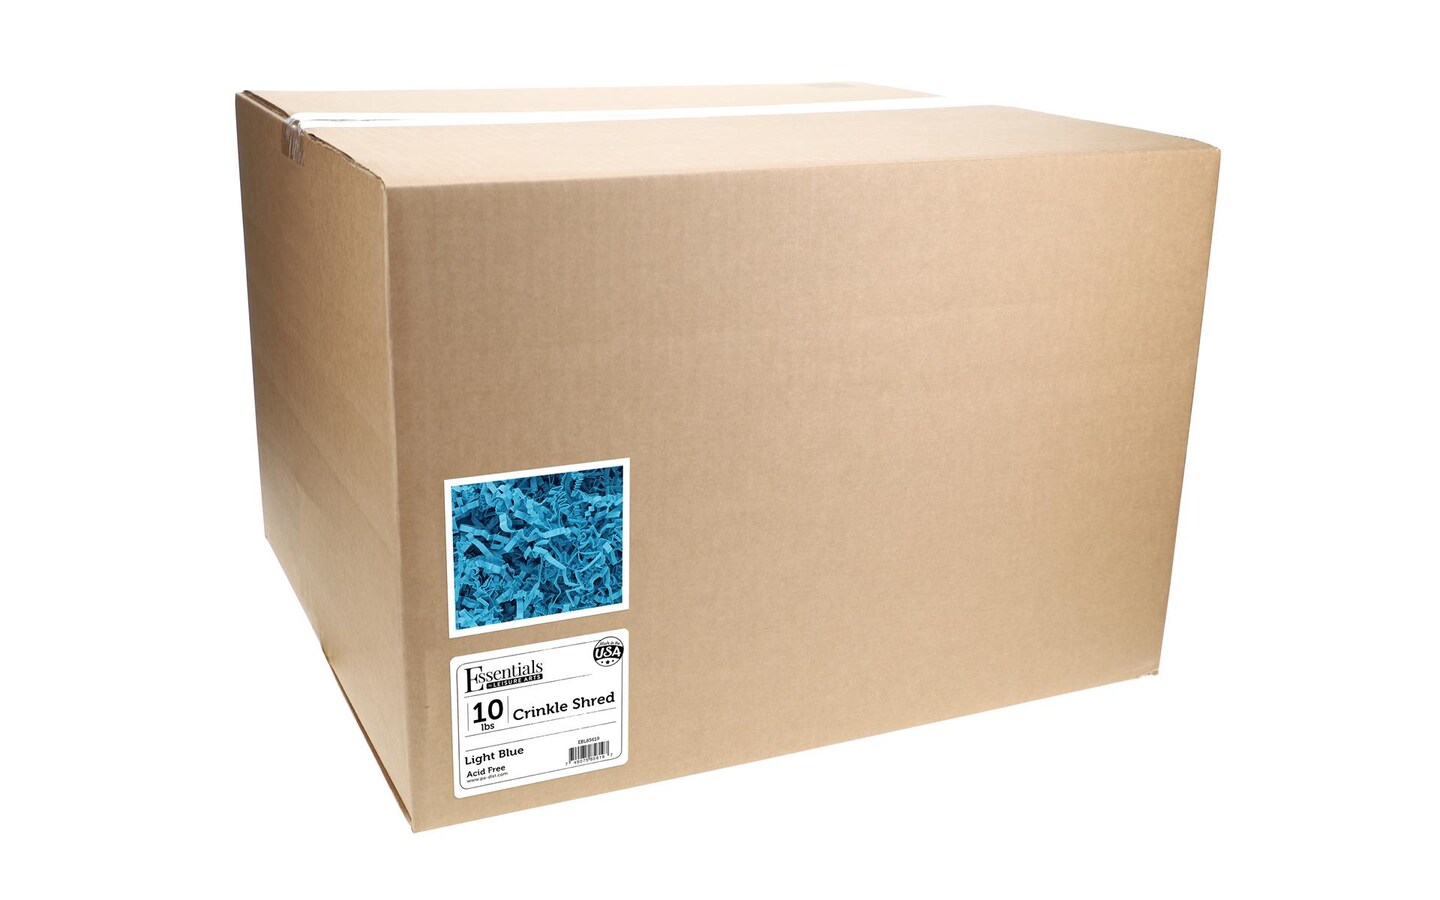 Essentials by Leisure Arts Crinkle Shred Box, Light Blue, 10lbs Shredded Paper Filler, Crinkle Cut Paper Shred Filler, Box Filler, Shredded Paper for Gift Box, Paper Crinkle Filler, Box Filling